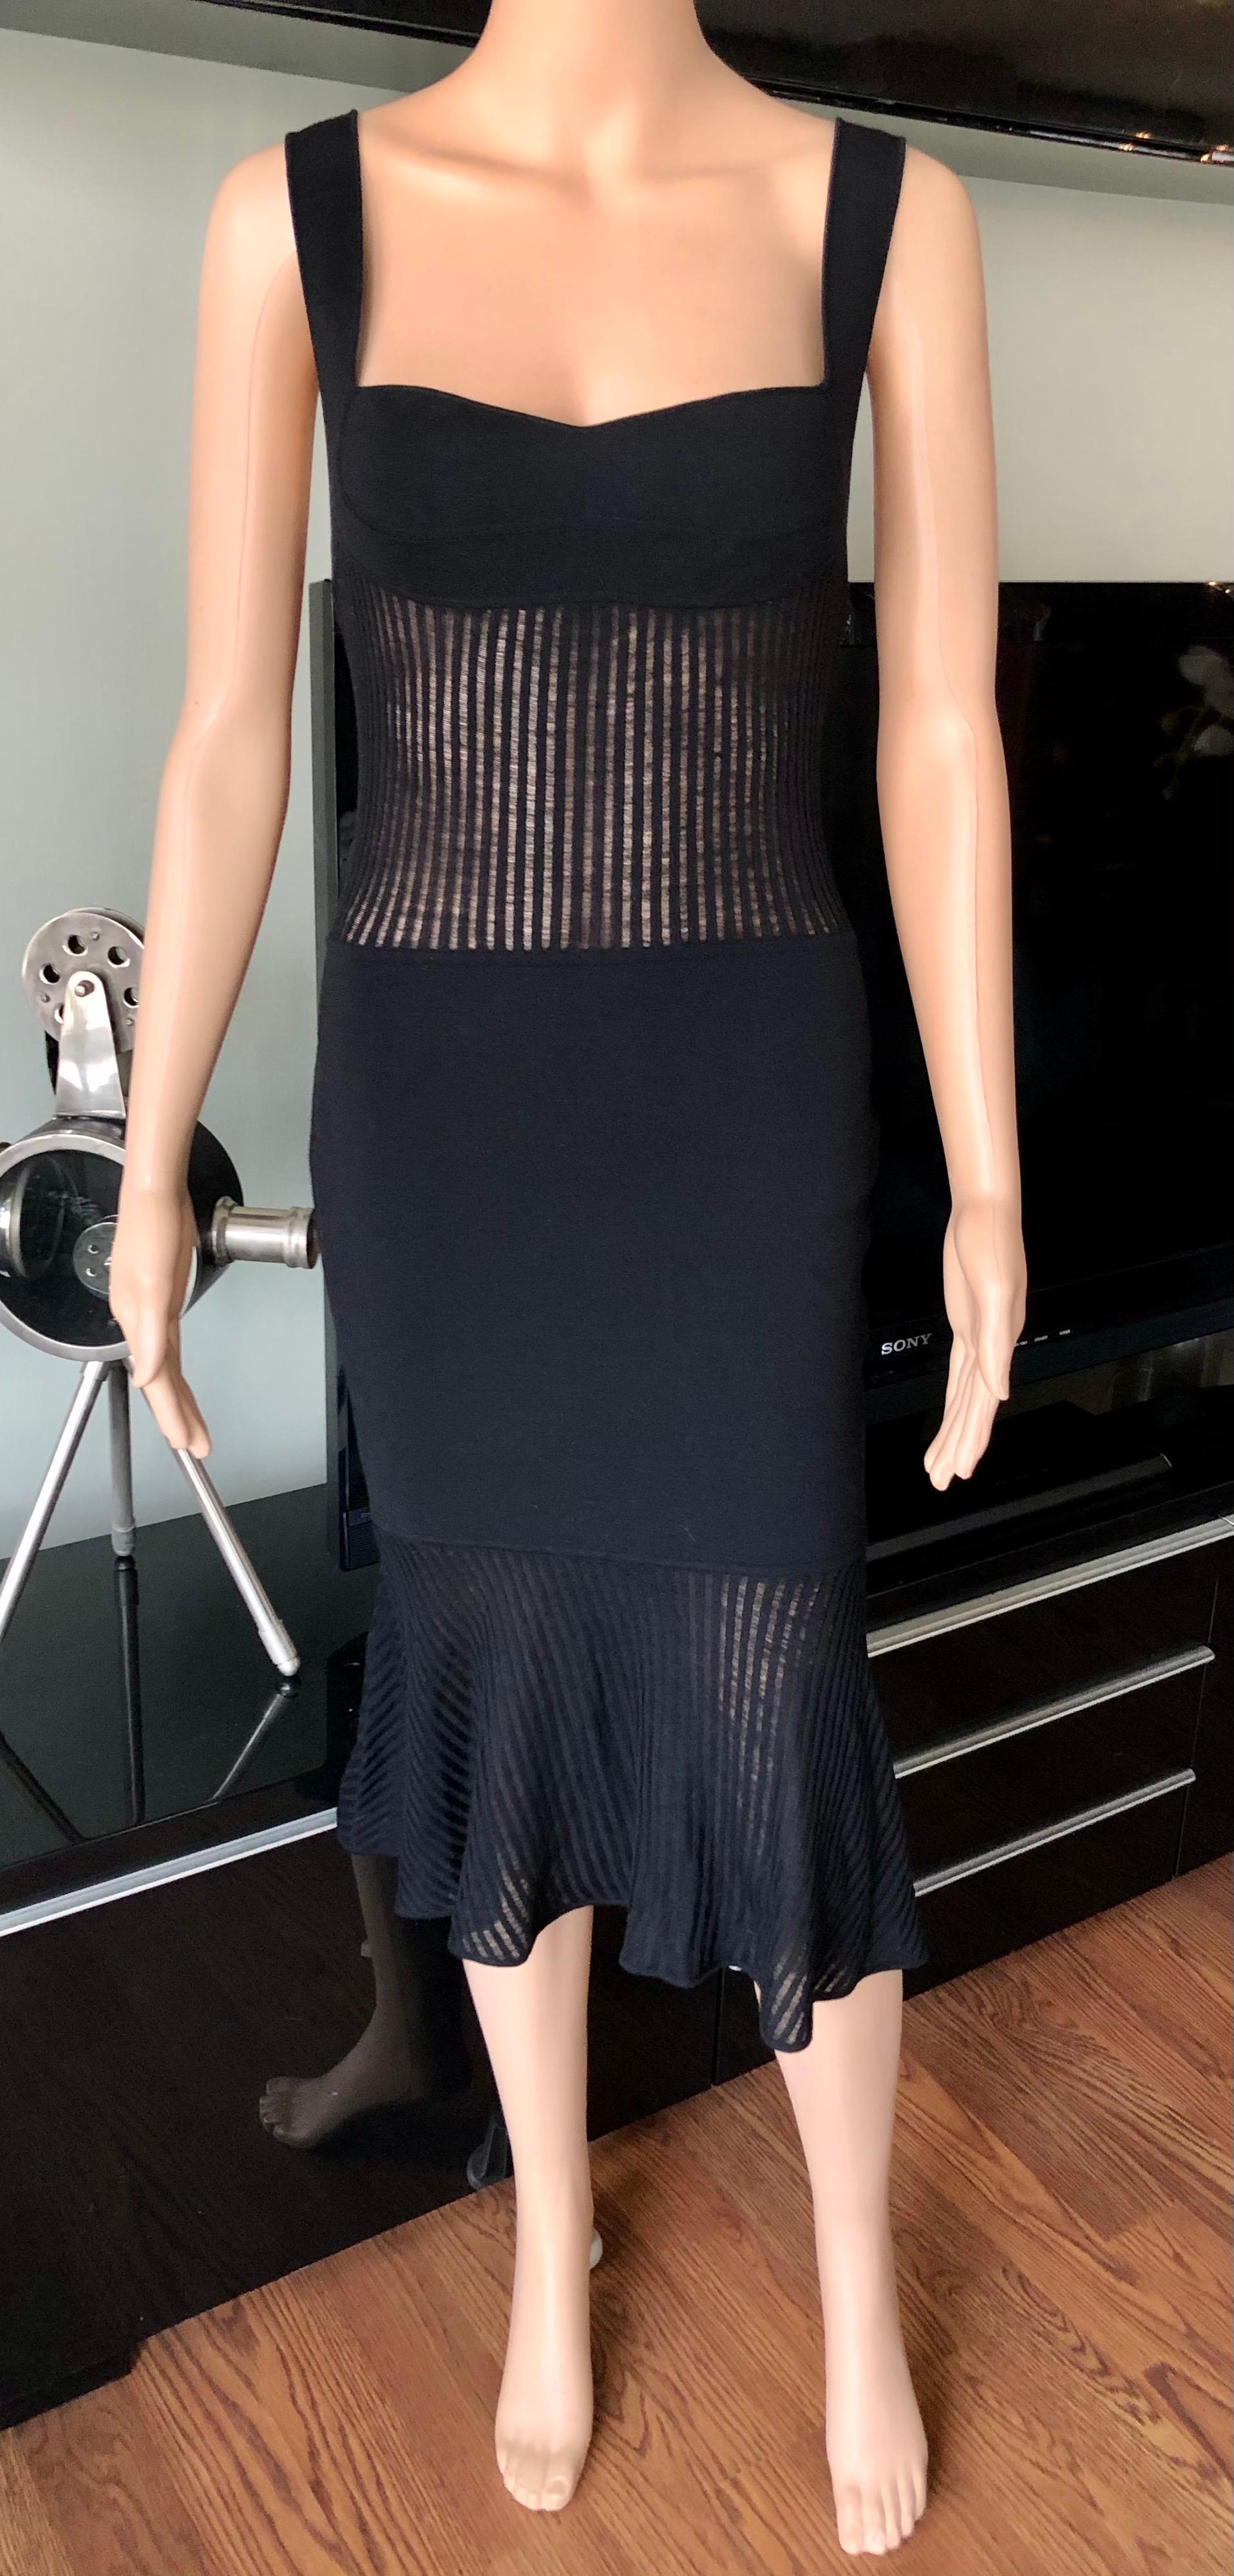 Gianni Versace 1990’s Vintage Sheer Knit Black Dress In Excellent Condition For Sale In Naples, FL